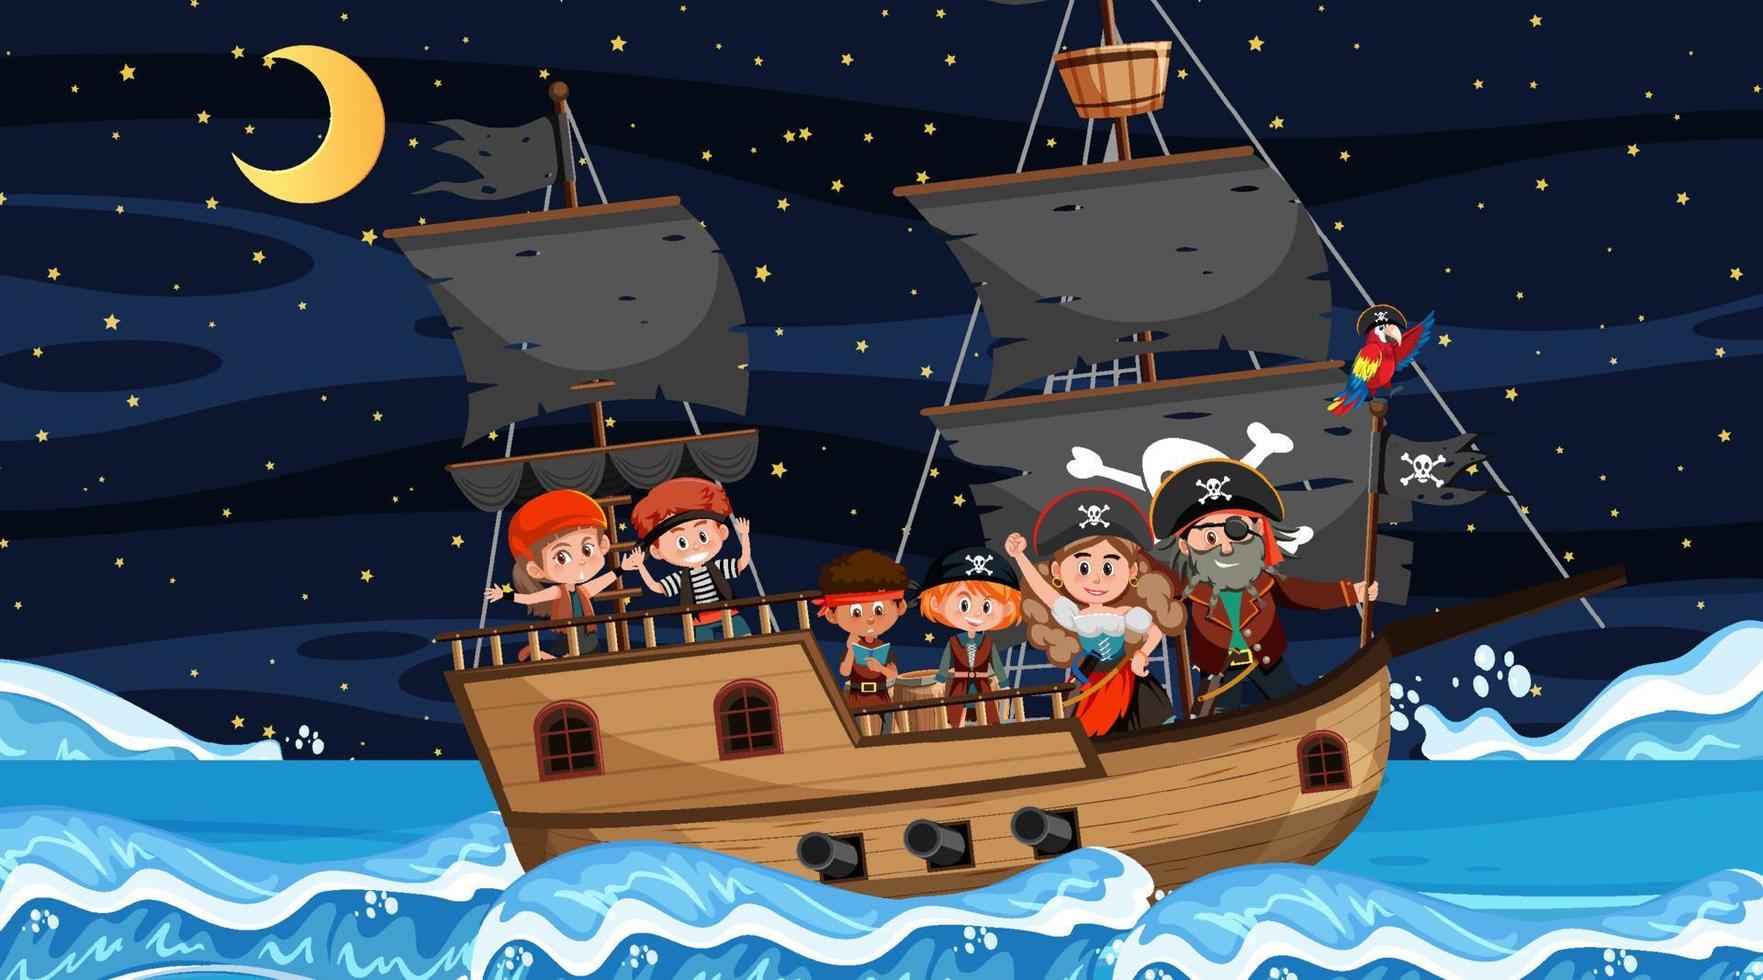 Ocean scene at night with Pirate kids on the ship vector